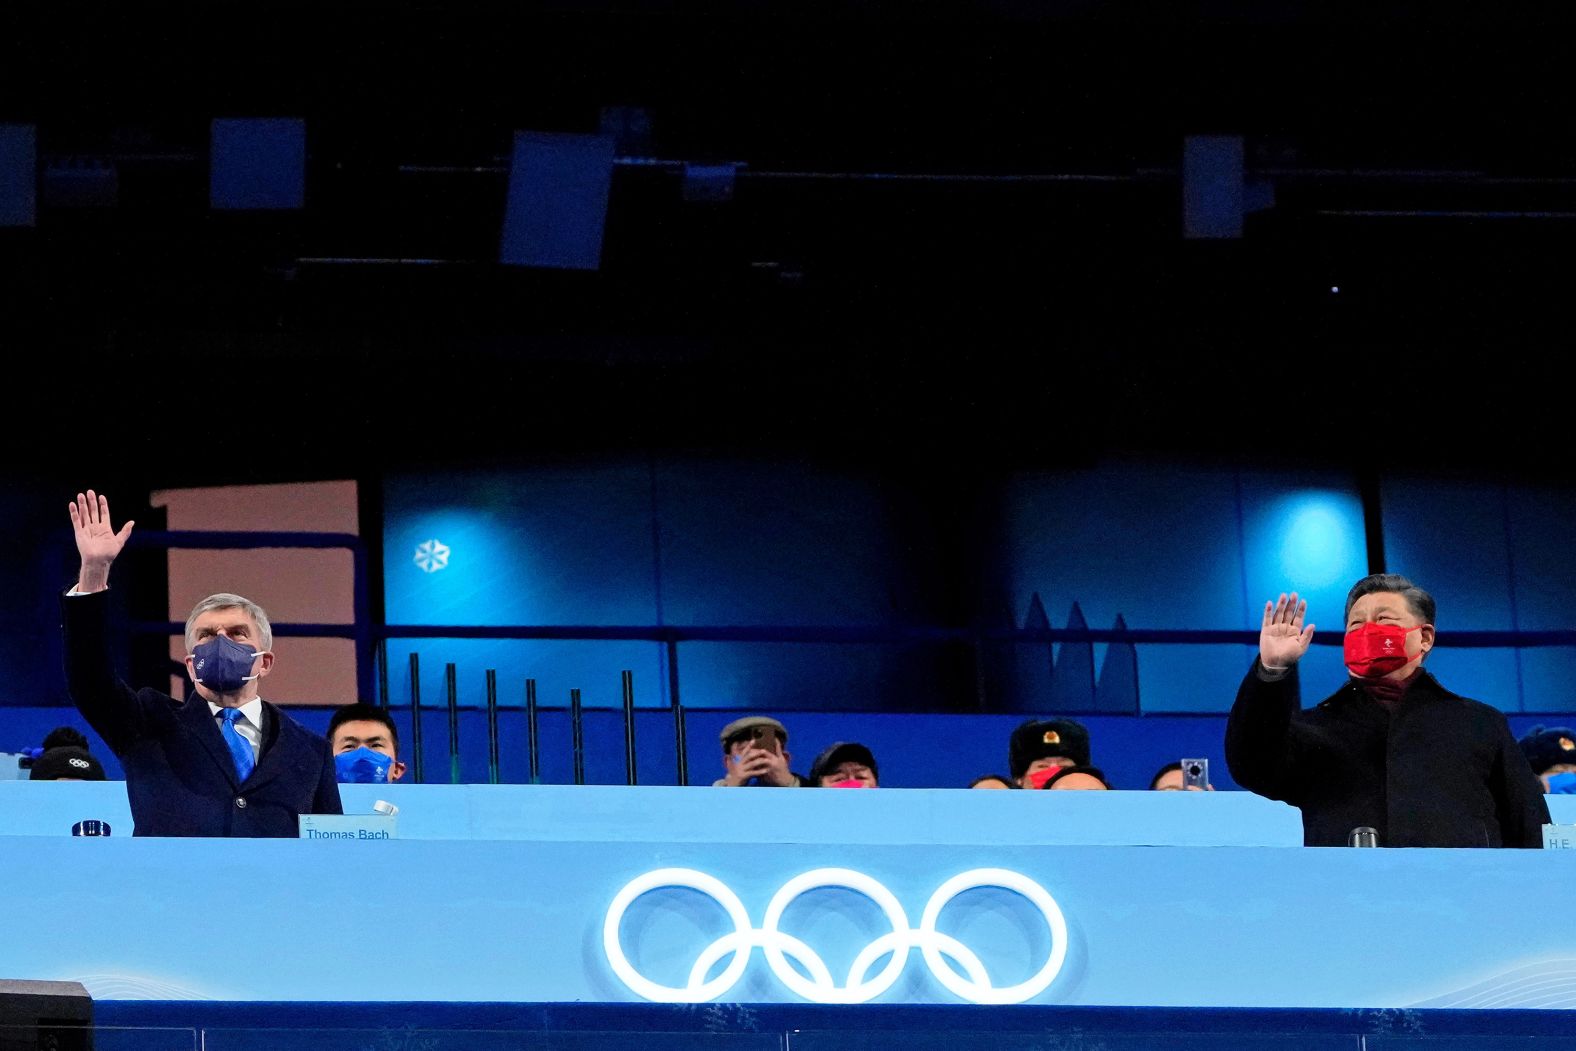 Xi and Thomas Bach, president of the International Olympic Committee, watch the closing ceremony of the <a href="index.php?page=&url=http%3A%2F%2Fwww.cnn.com%2F2022%2F02%2F04%2Fsport%2Fgallery%2Fbeijing-winter-olympics-best-photos%2Findex.html" target="_blank">Beijing Winter Olympics</a> in February 2022.